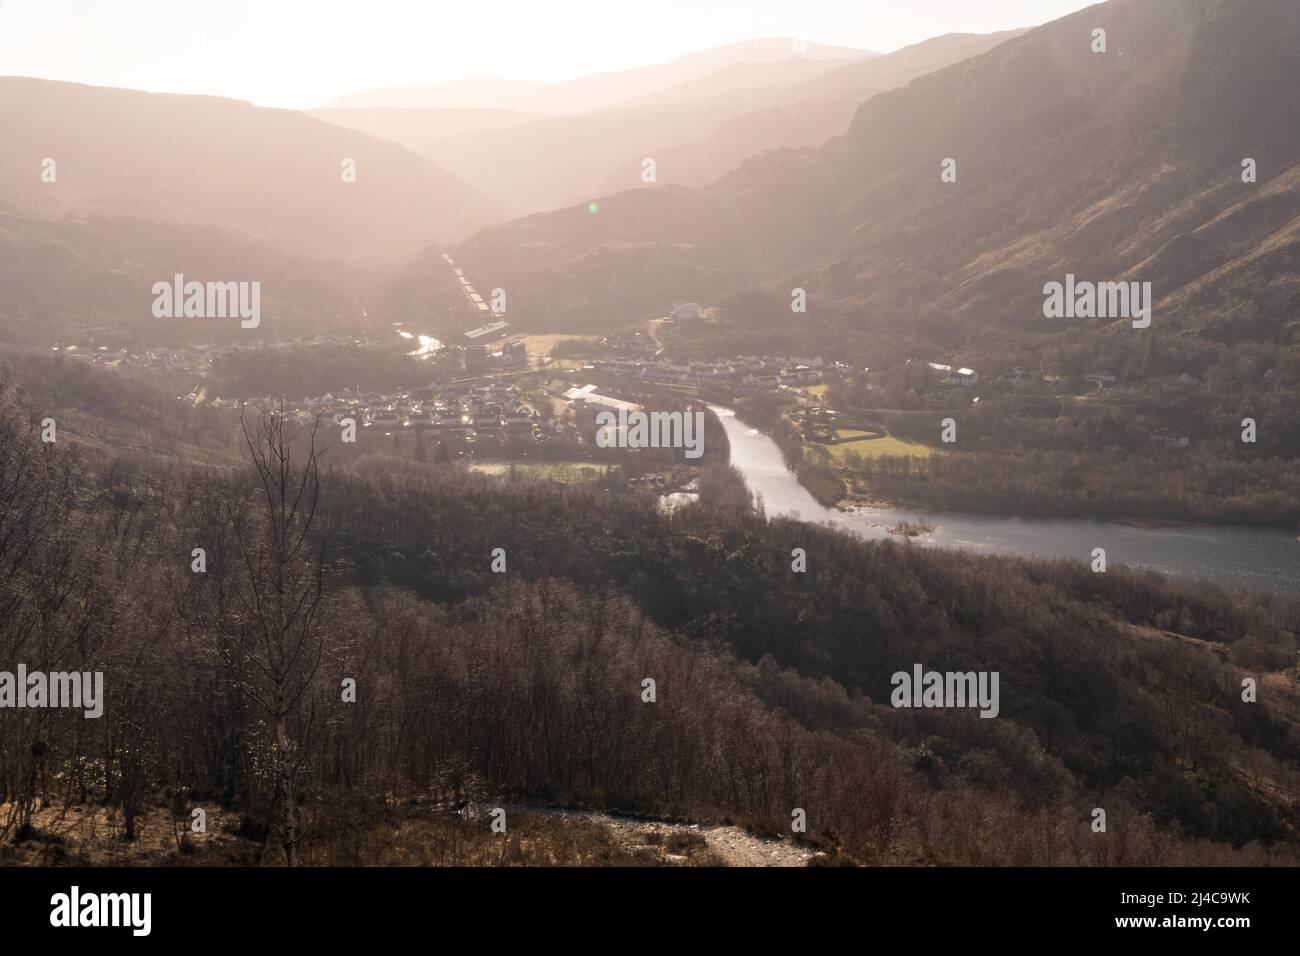 A view of Kinlochleven, a village located in the Scottish Highlands along the West Highland Way. Stock Photo